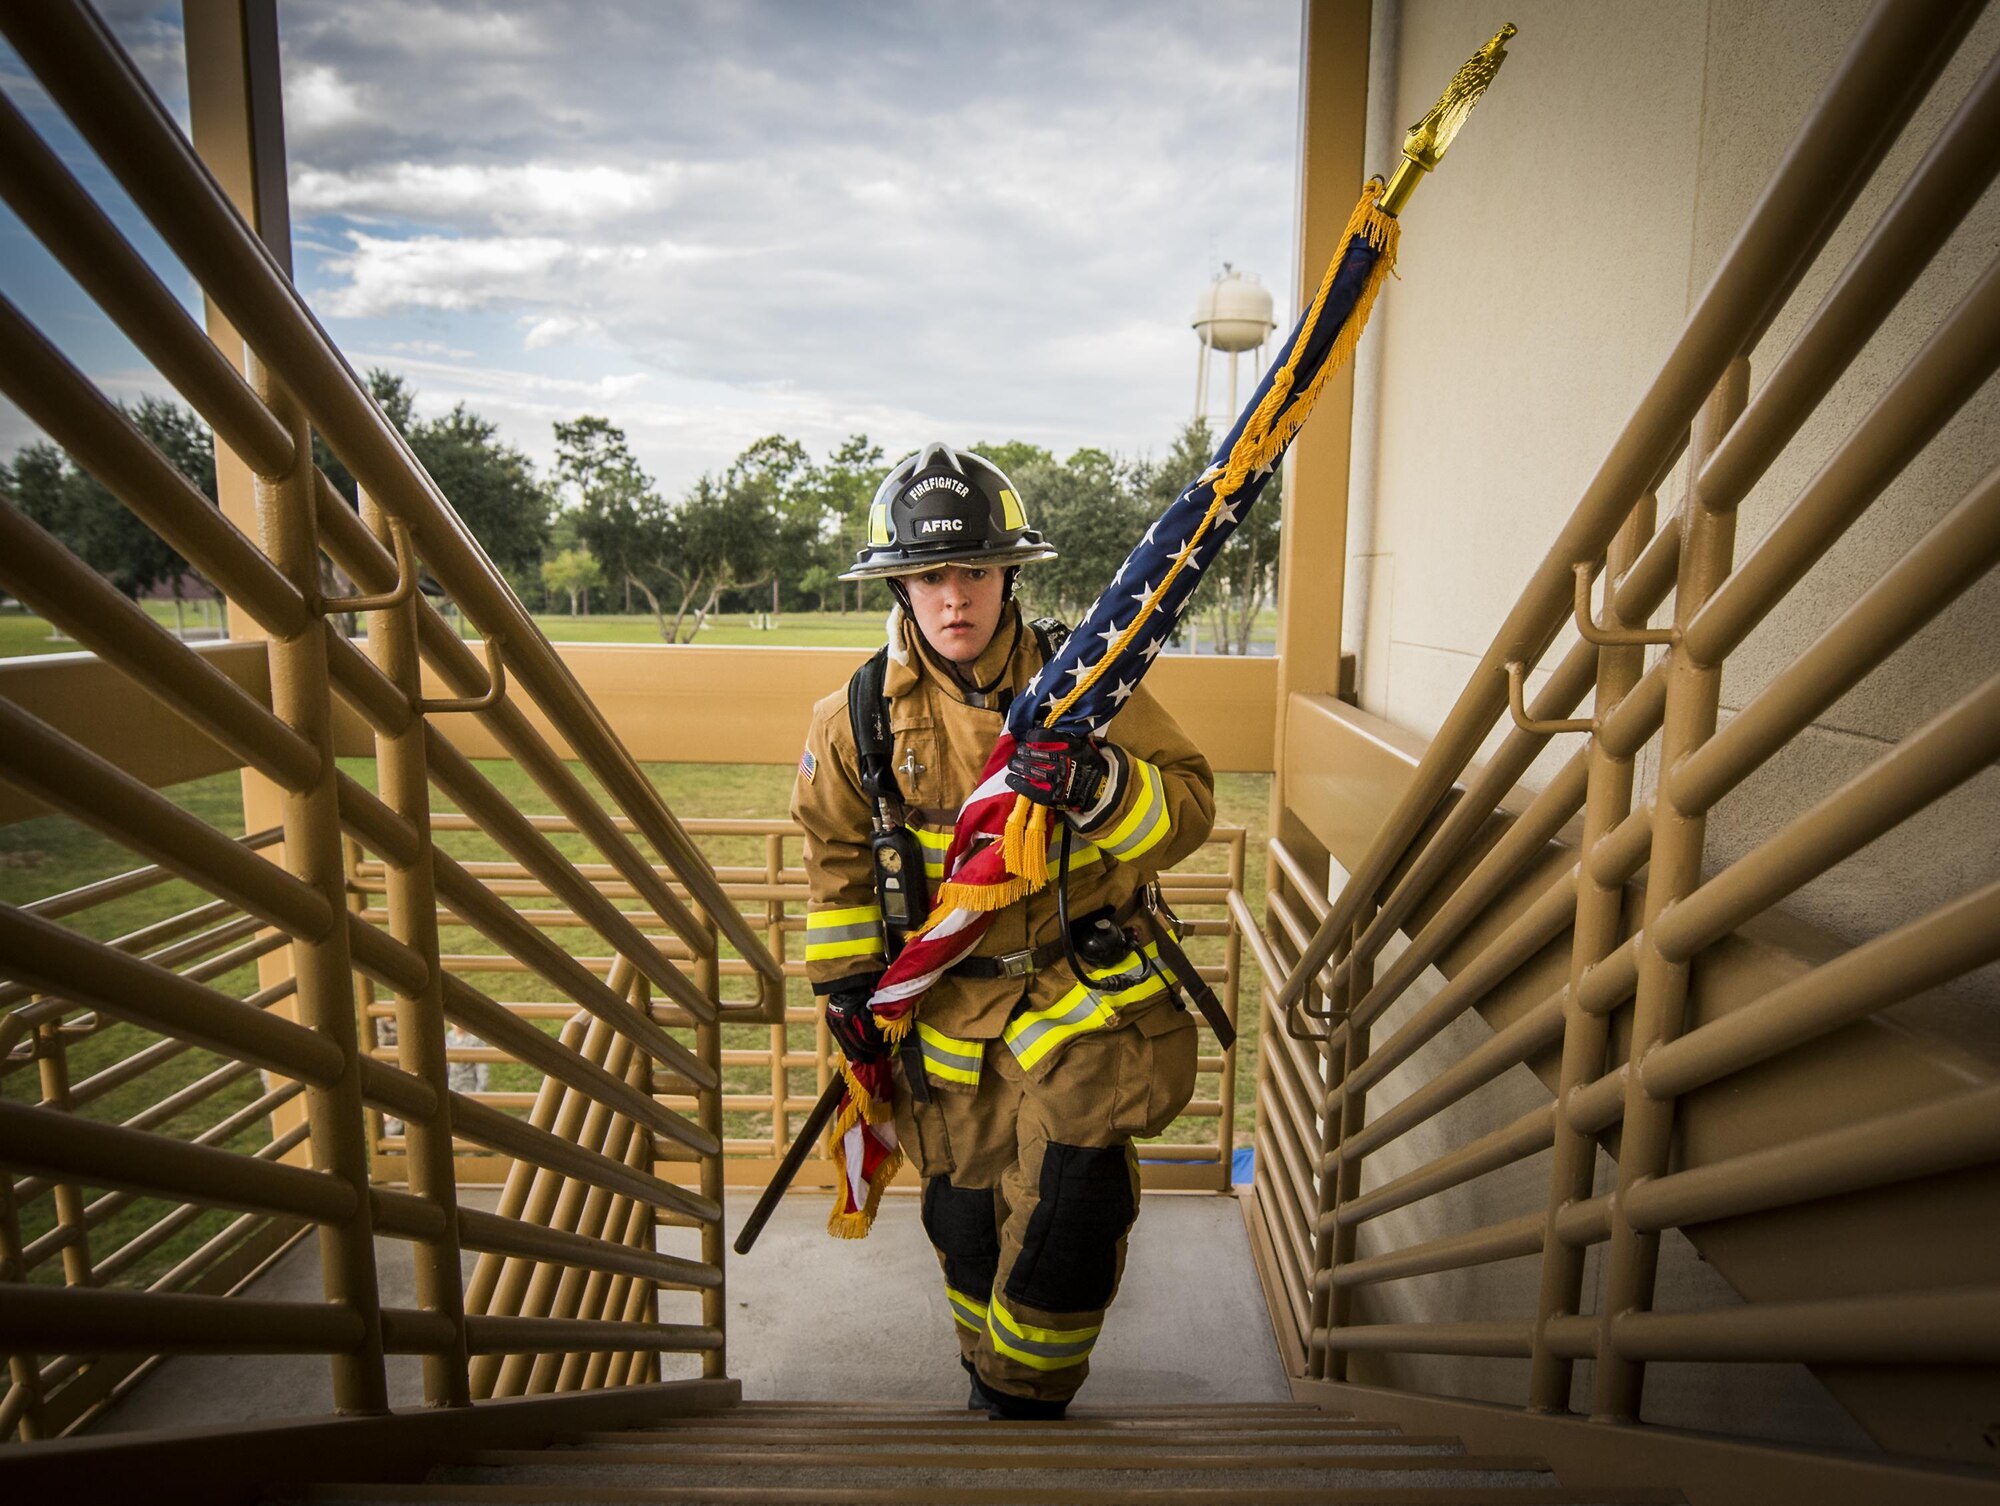 Airman Virginia Davis, 919th Special Operations Civil Engineer Squadron, carries an American flag up a flight of stairs while wearing her firefighting gear during a 9/11 Memorial Stair Climb event at Duke Field, Fla., Sept. 11.  The 24-hour climb began at 8:46 a.m. Sept. 10 with the 919th Special Operations Wing commander walking the flag up the outside stairwell of the base’s billeting facility.  Wing Airmen took turns walking the flag up and down the stairwell the entire day until it was delivered to a firefighter and security forces color guard at 8:46 a.m. the next morning for a 9/11 Remembrance ceremony.  More than 115 Airmen carried the flag throughout the day and night for a total of more than 207,000 steps.  (U.S. Air Force photo/Tech. Sgt. Sam King)